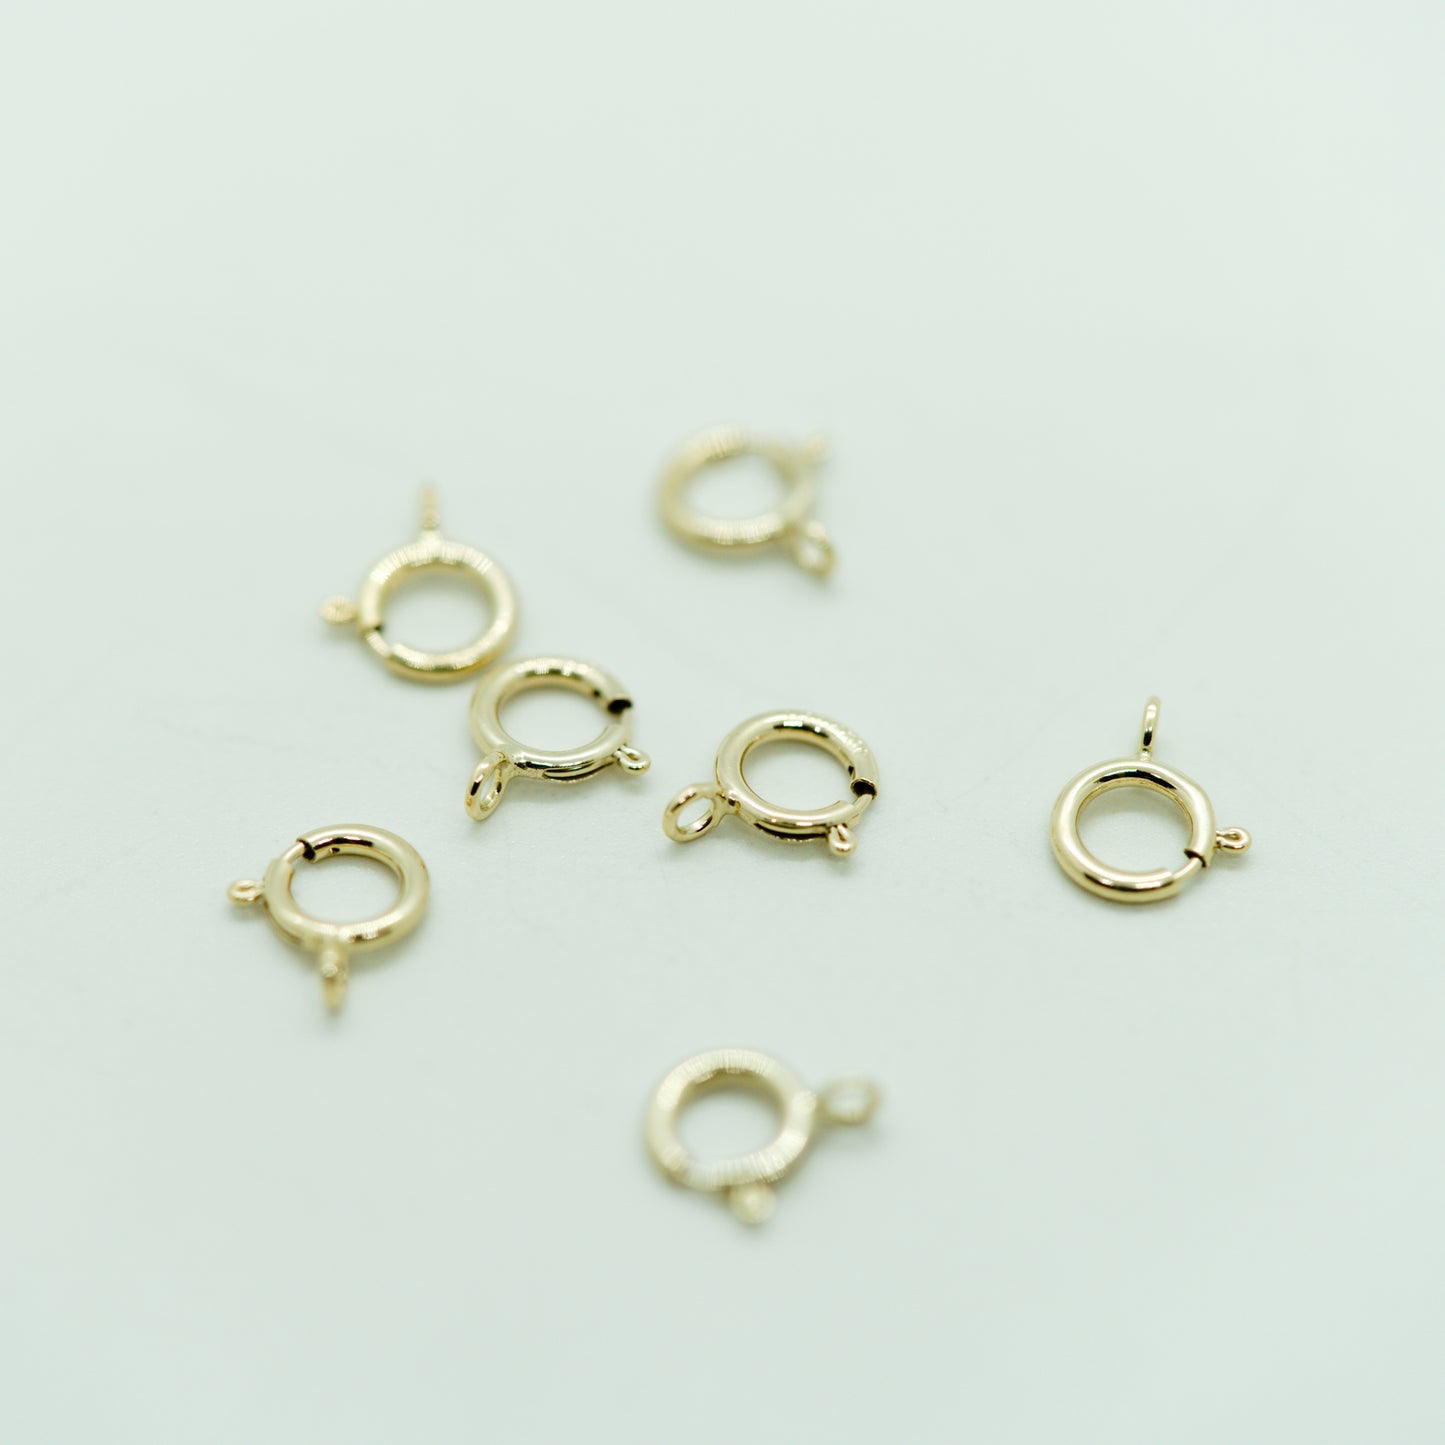 10 pcs Gold Filled Spring Ring Clasp w/Open Ring 6mm